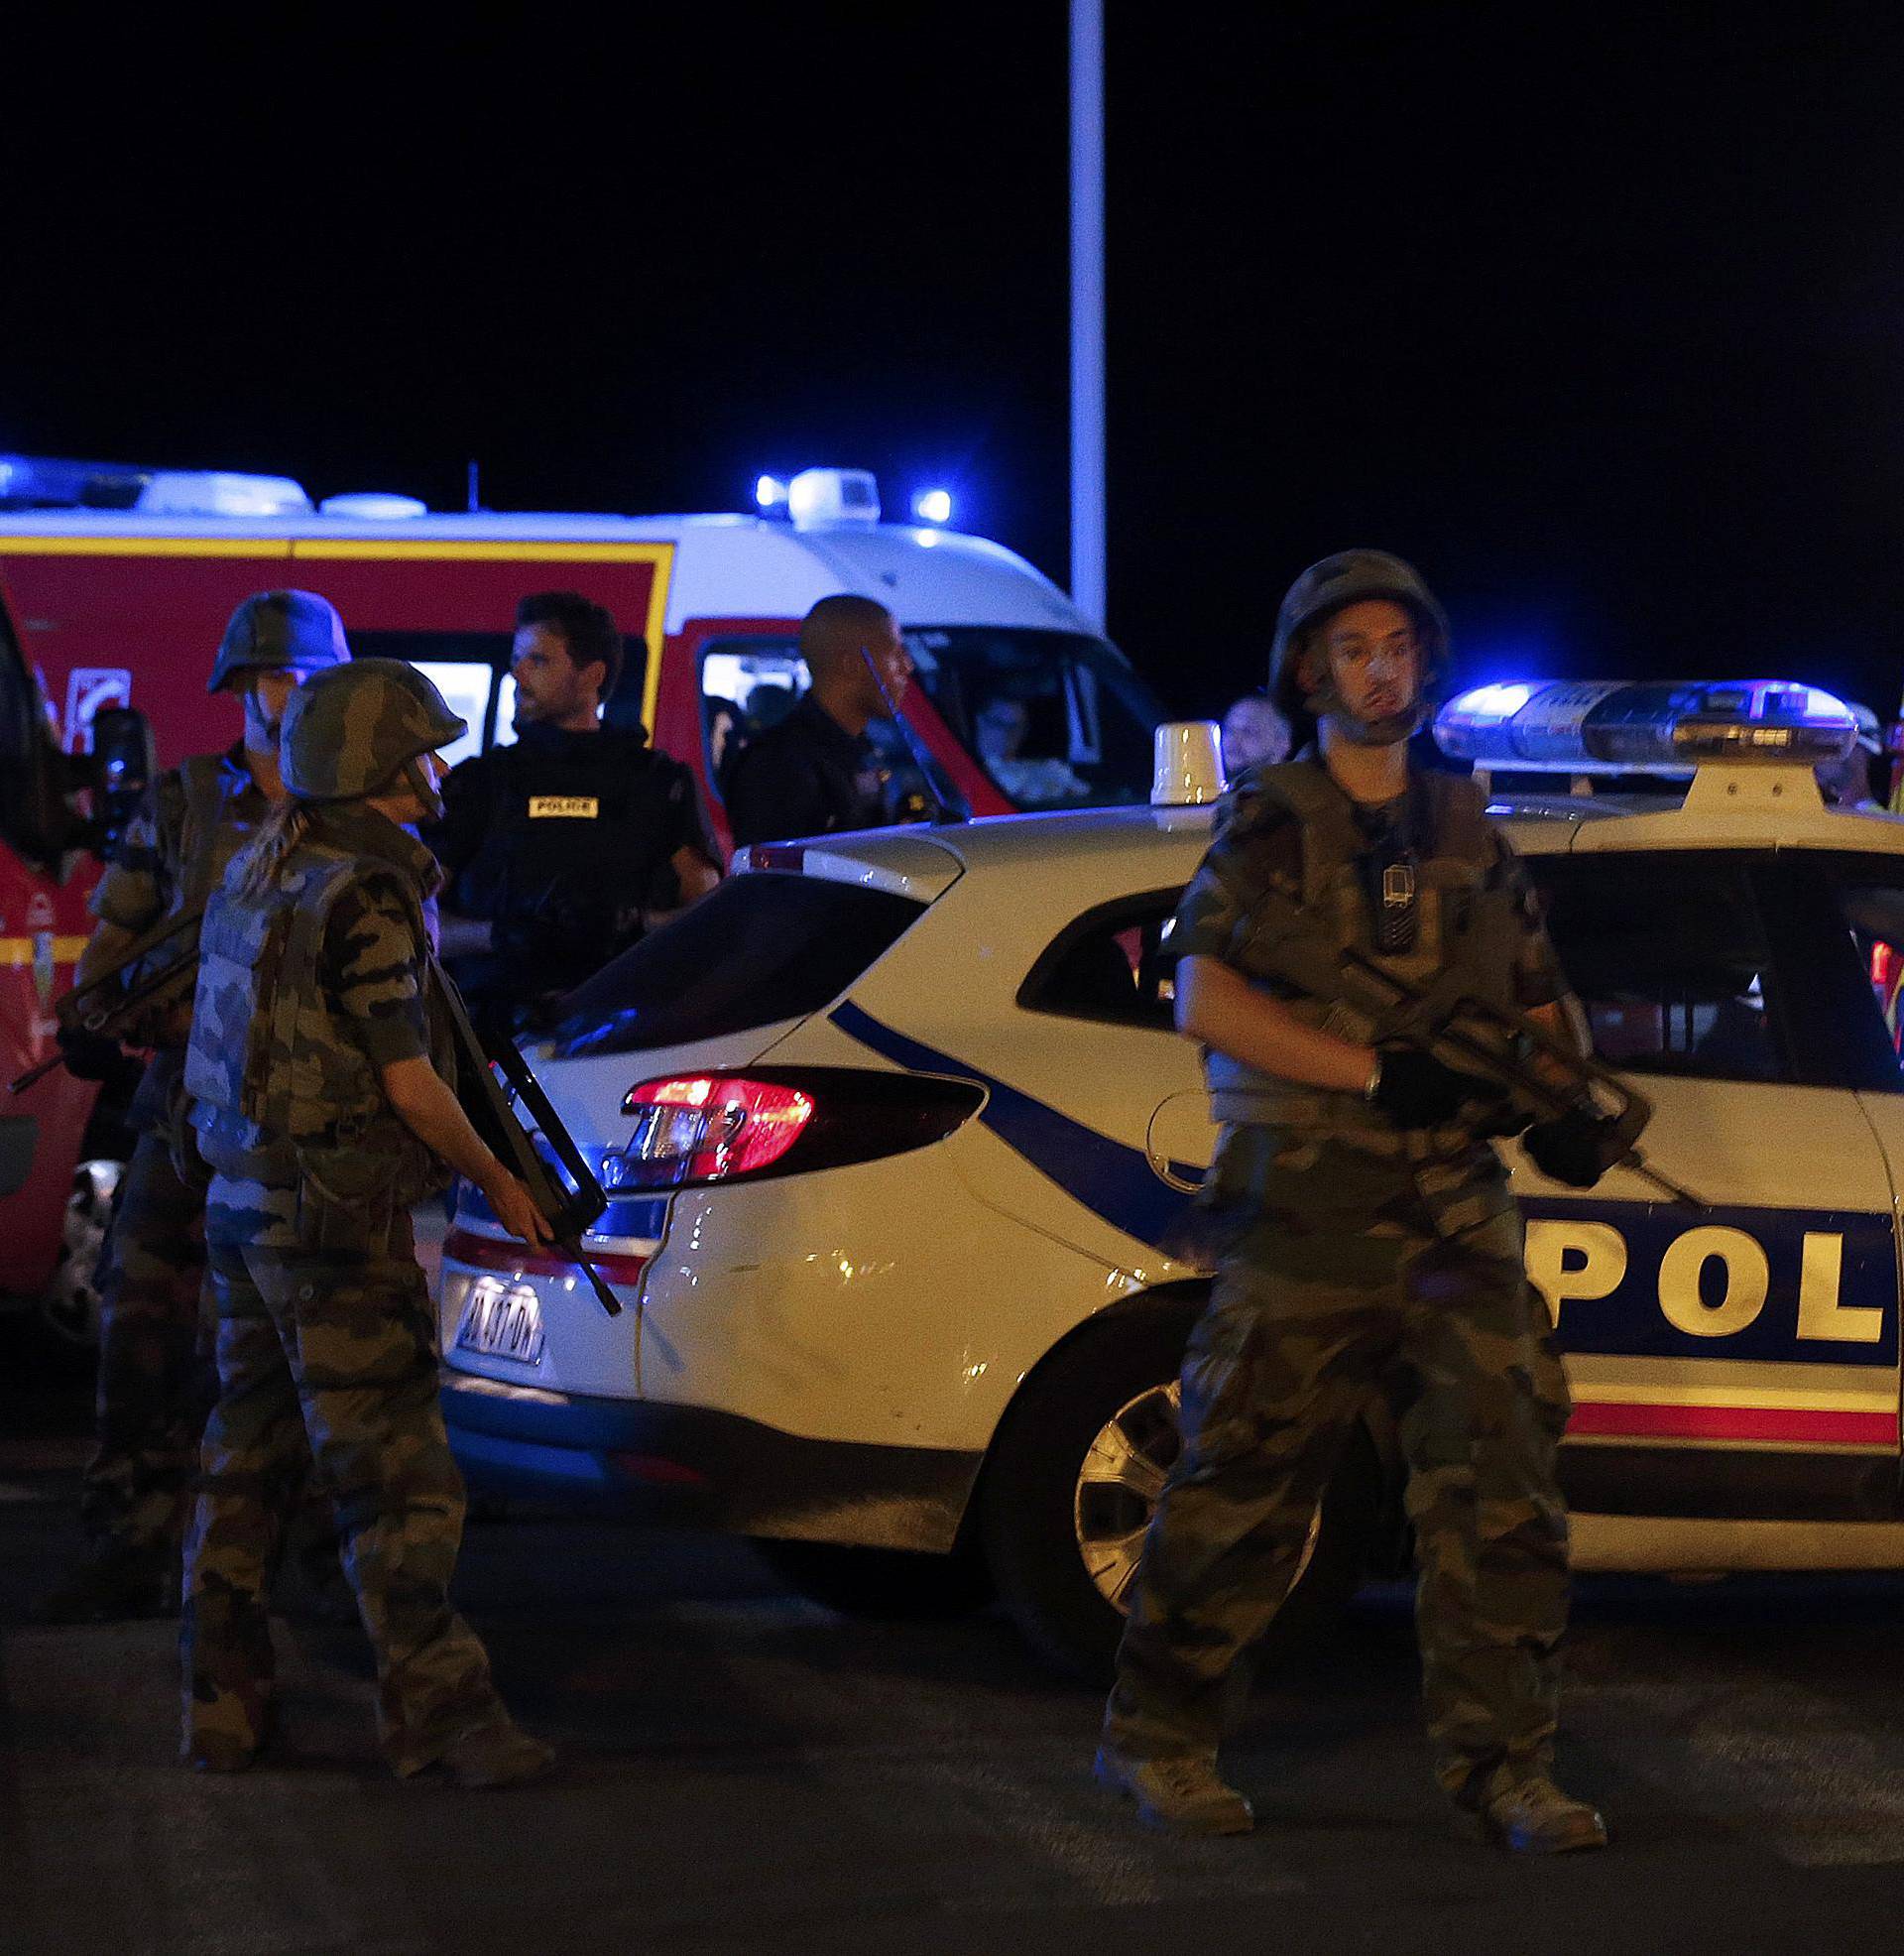 French soldiers and rescue forces are seen at the scene whare at least 30 people were killed in Nice when a truck ran into a crowd celebrating the Bastille Day national holiday